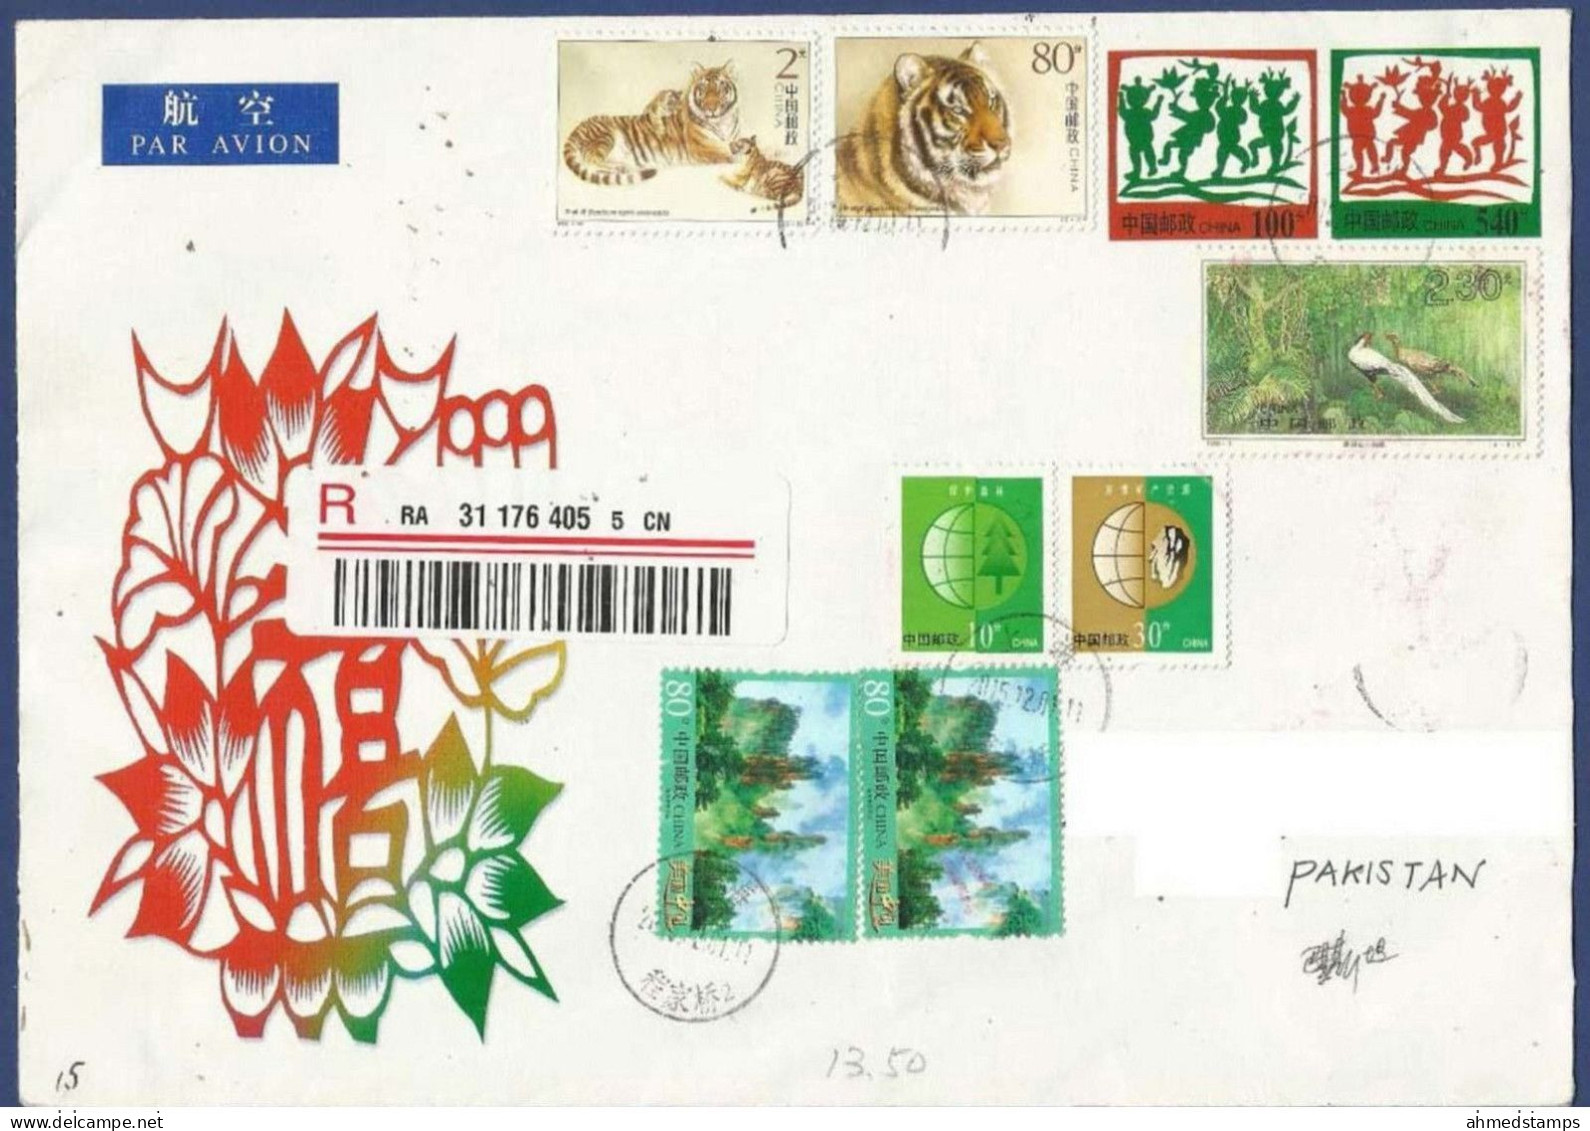 CHINA  REGISTERED POSTAL USED AIRMAIL COVER TO PAKISTAN - Corréo Aéreo